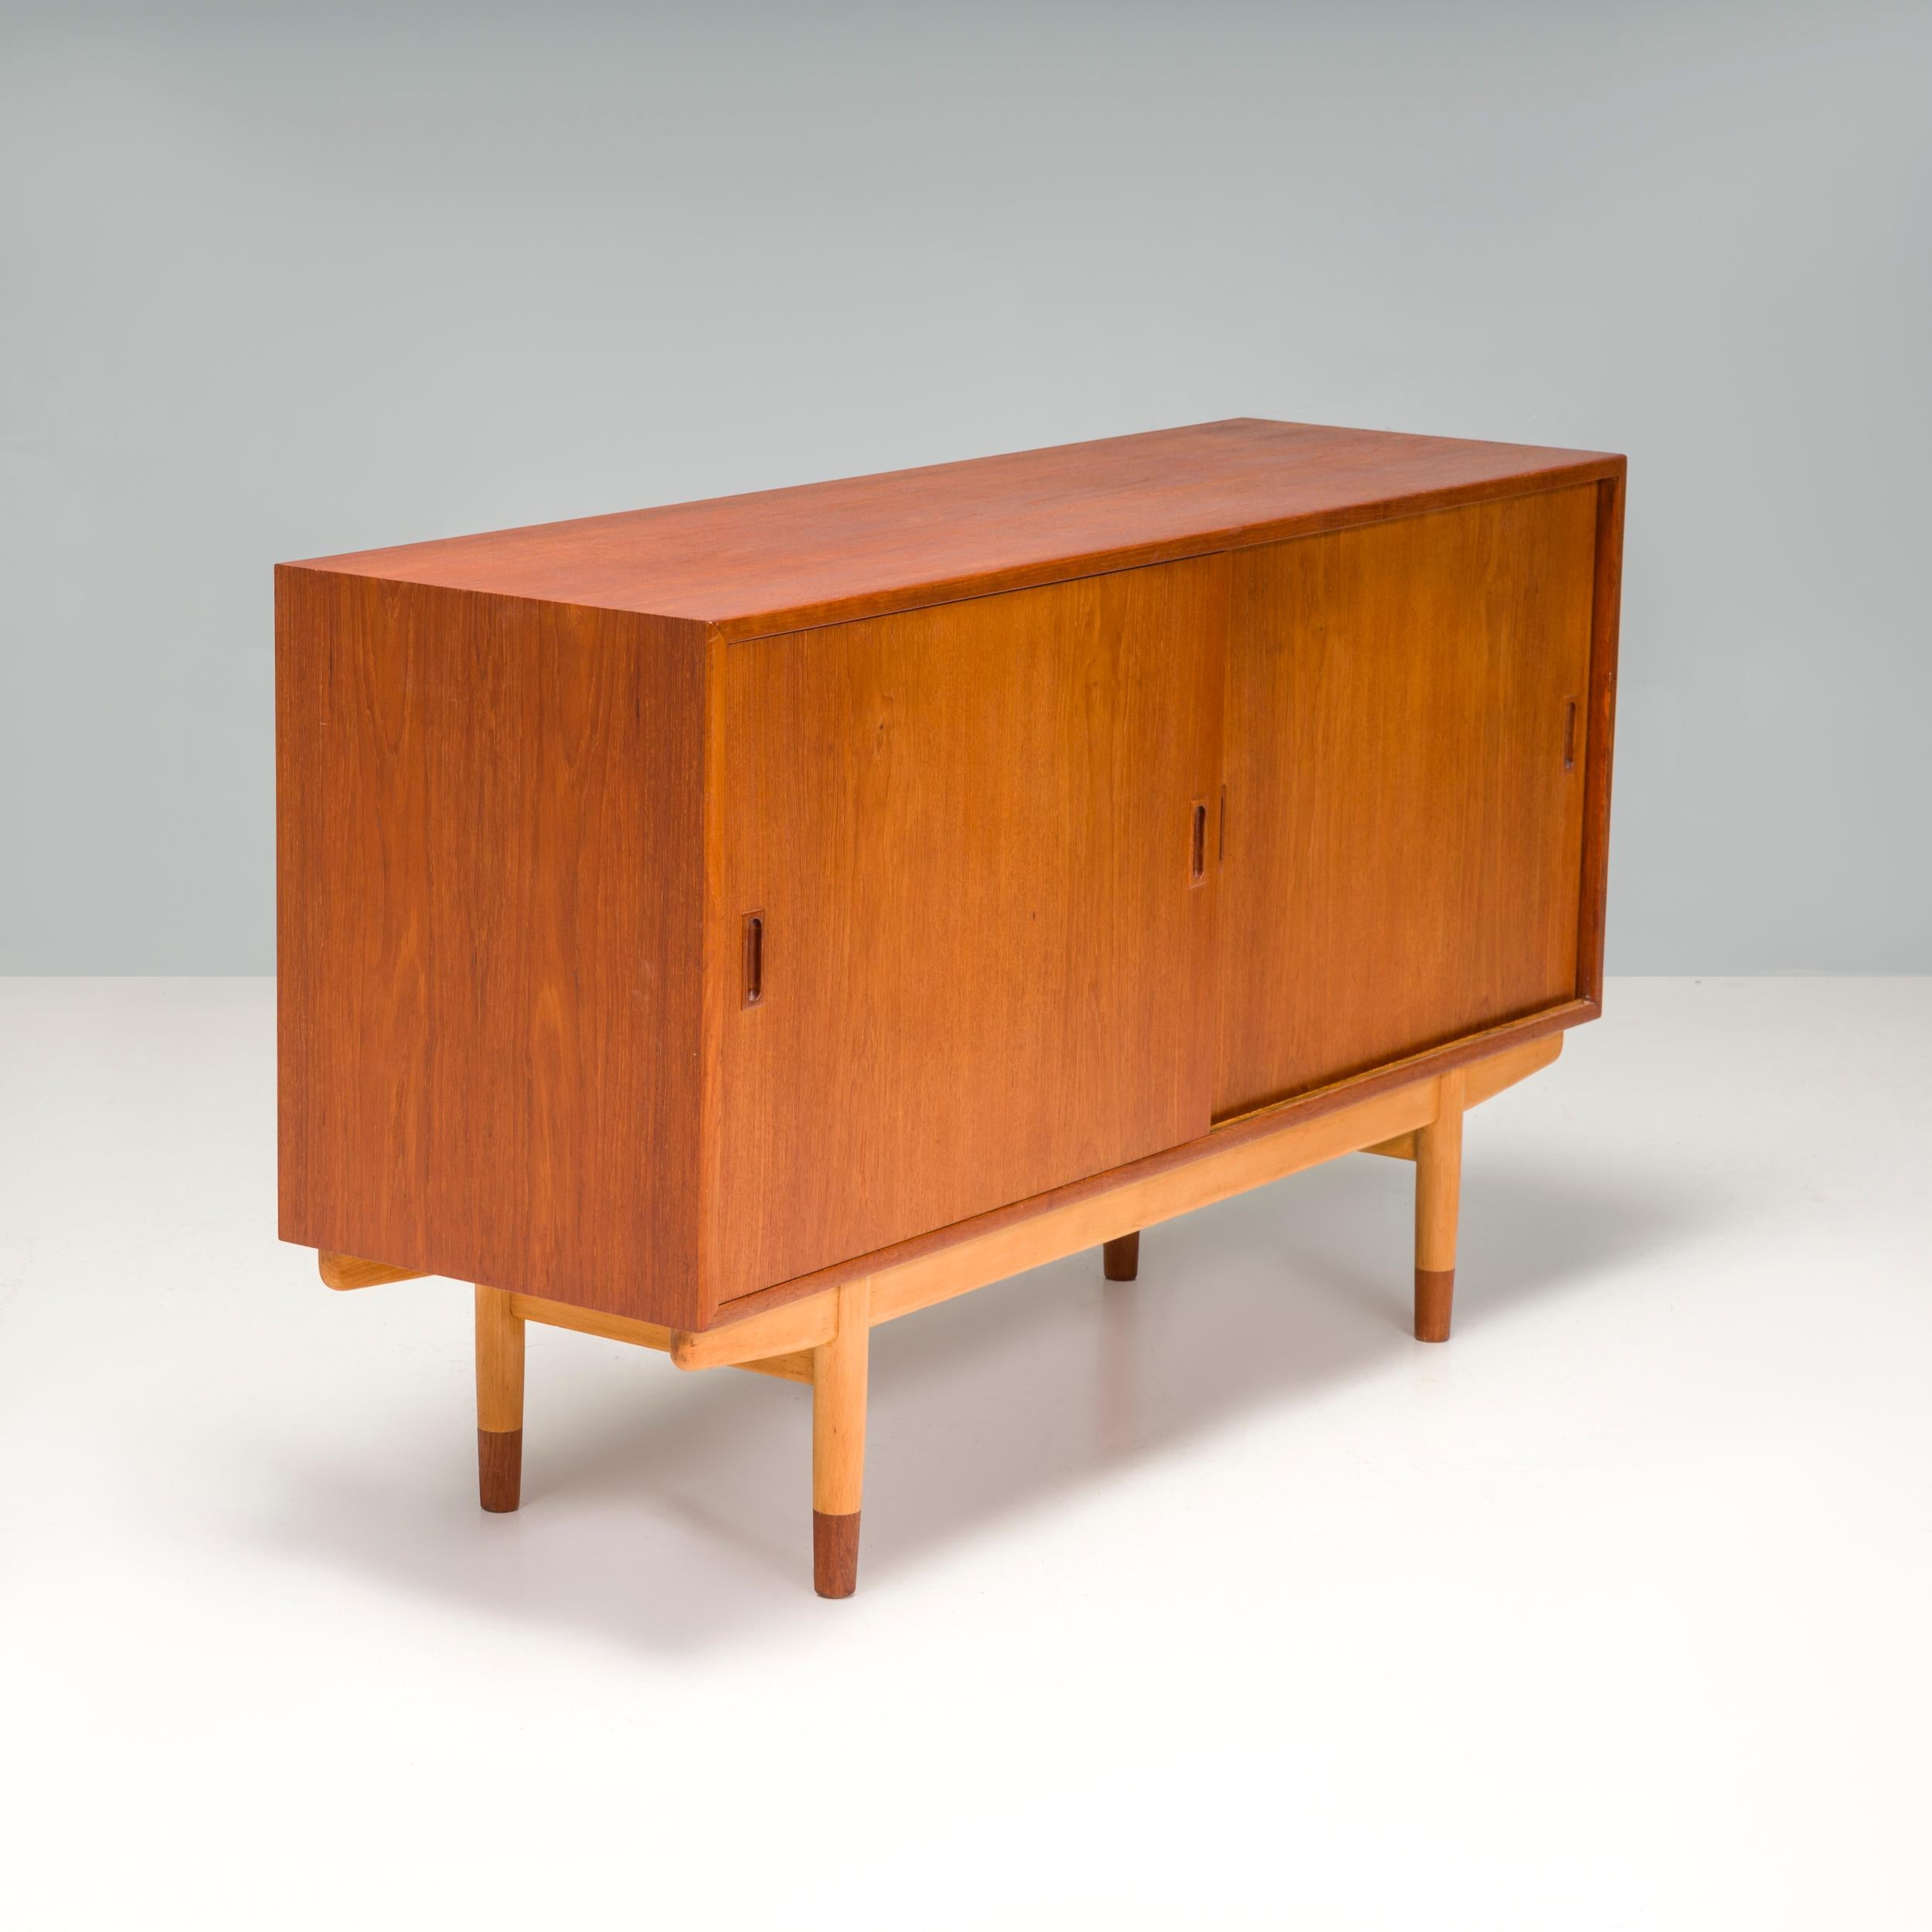 Produced in Denmark during the 1950s by Søborg Møbelfabrik, it features two sliding doors which open to reveal a beech-lined interior with two adjustable shelves and four dovetail-jointed drawers. The teak carcass is mounted on a beech frame and the